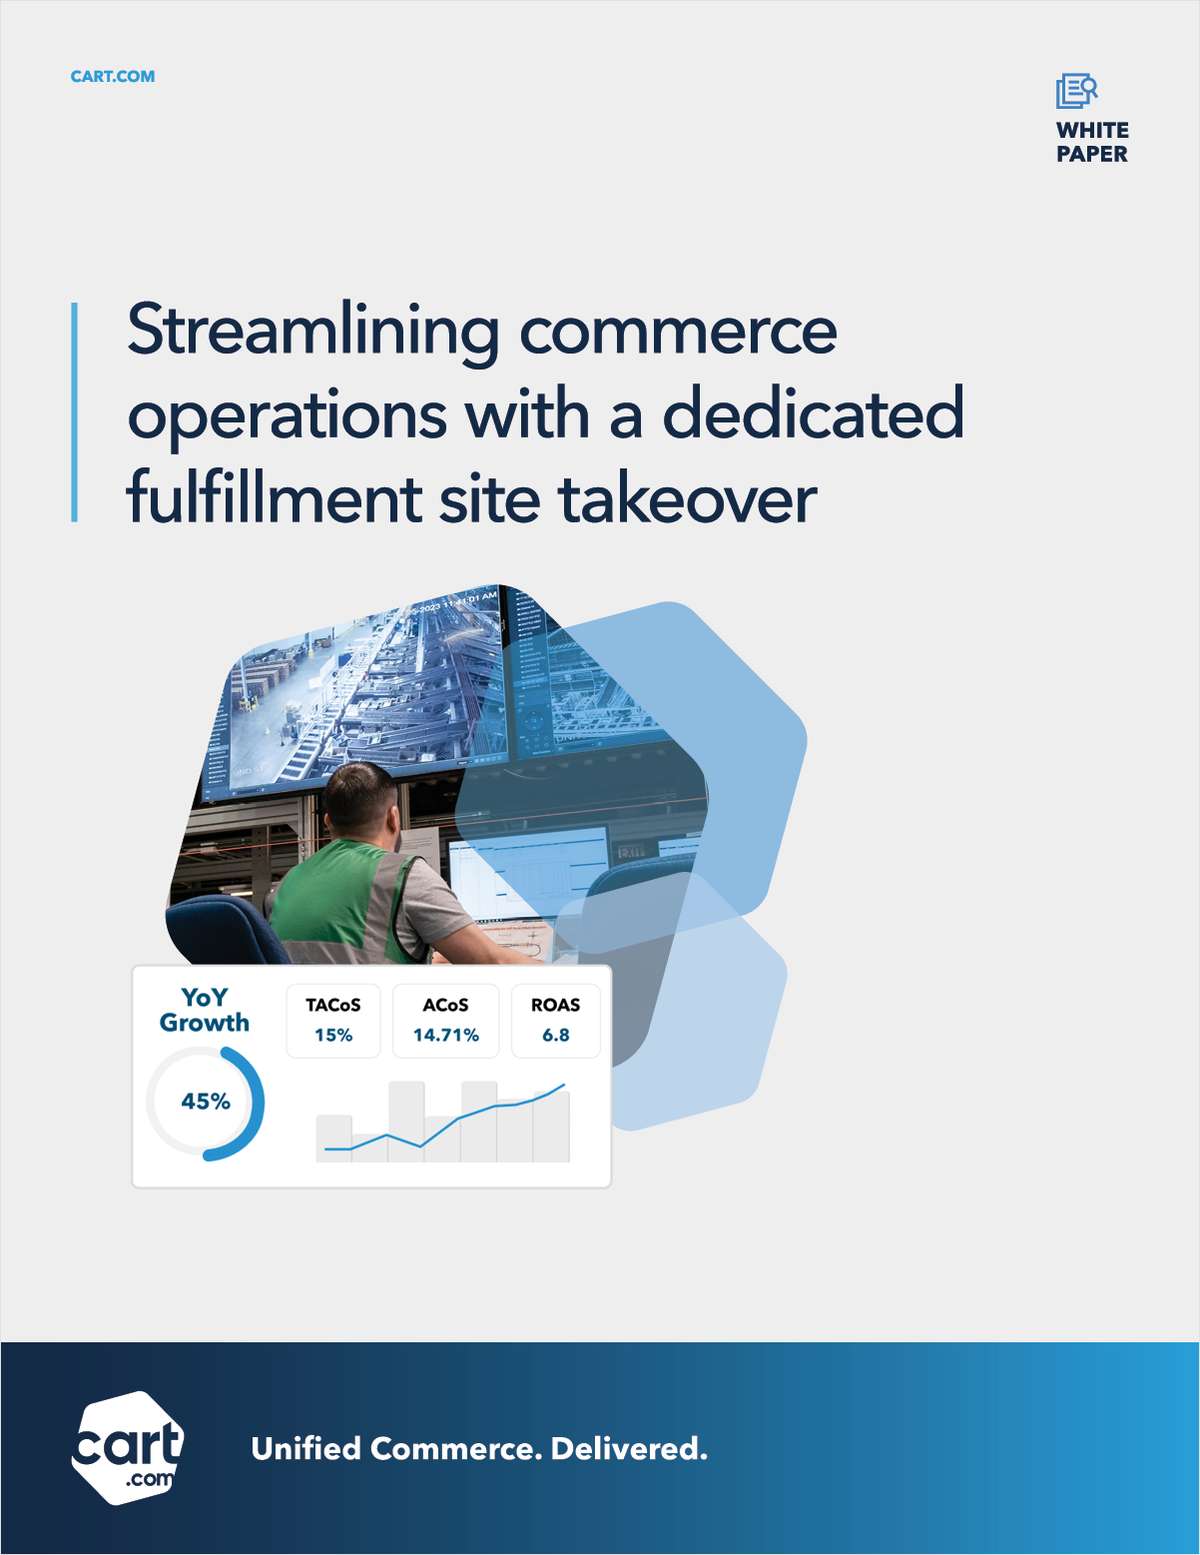 Streamlining Commerce Operations with a Dedicated Fulfillment Site Takeover